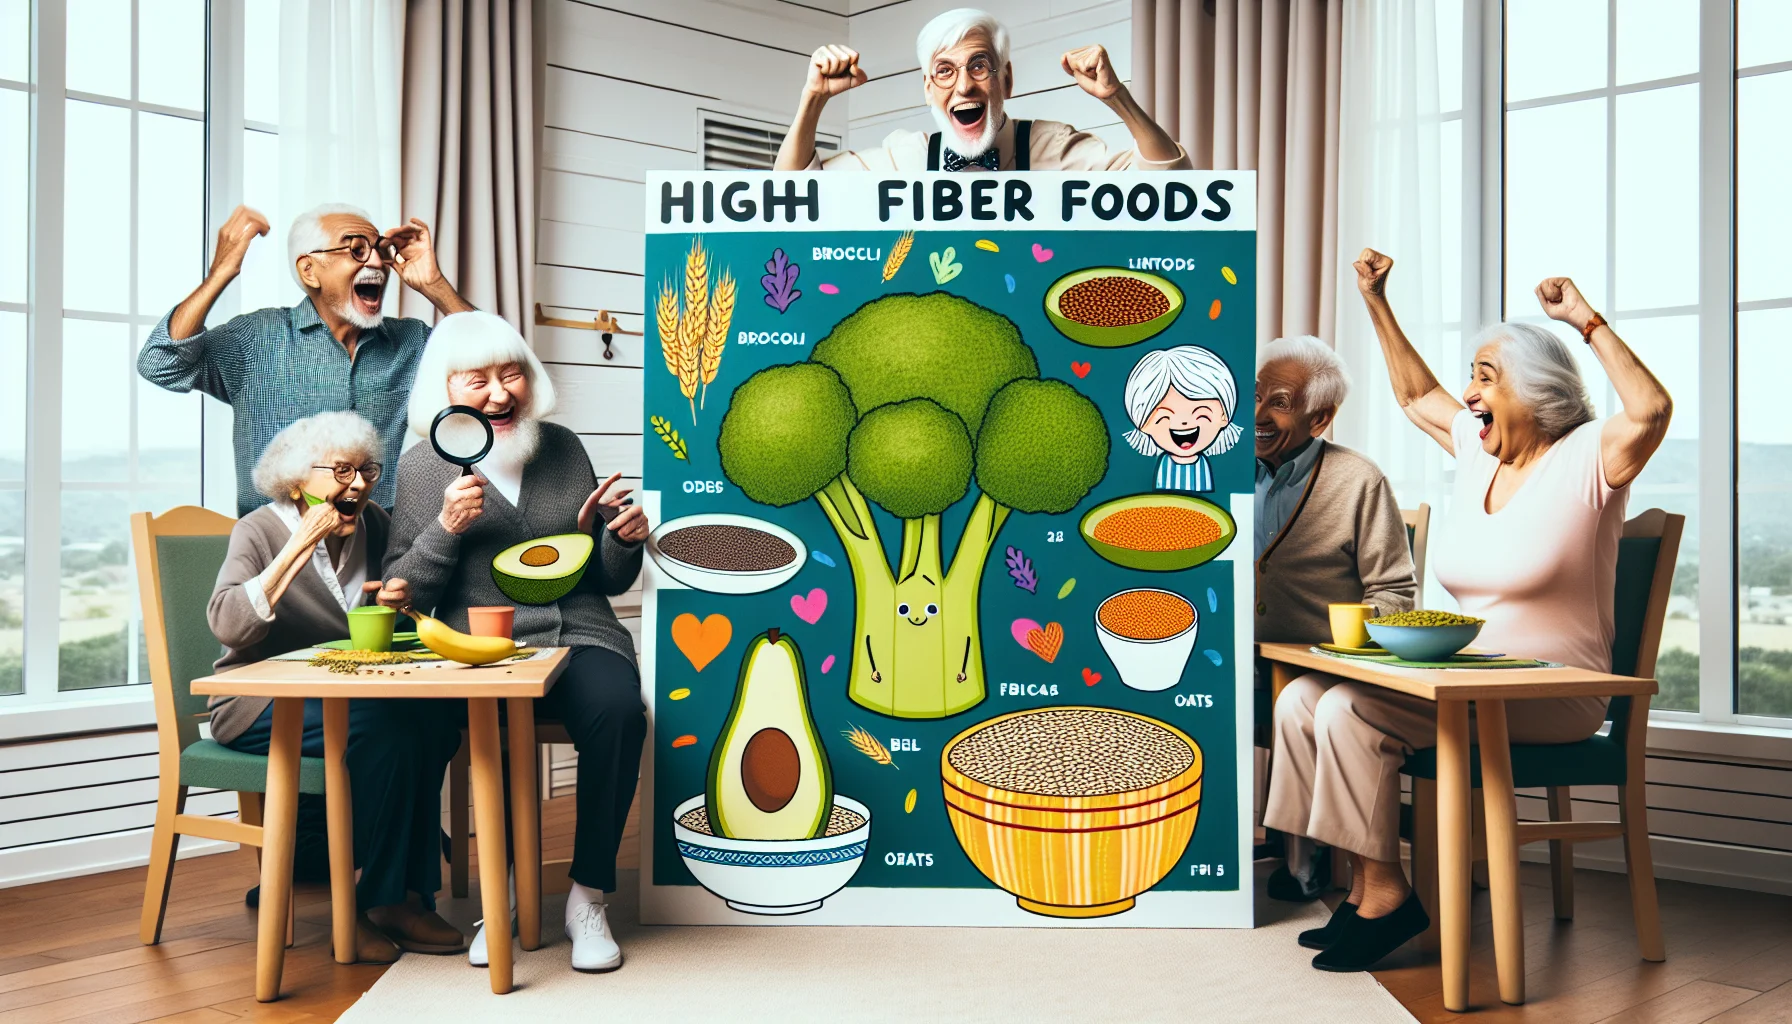 Create a playful image that takes the shape of a high fiber foods chart. It includes colorful illustrations of foods like broccoli, lentils, avocados, and oats, labeled with their fiber content. Make it stand in a lively dining area of a retirement home, with elderly people engaging in humorous activities around it. One older lady, Caucasian with white hair, is examining the chart with reading glasses and a magnifier, an older Middle-Eastern man is laughing holding an unusually large broccoli, and a South Asian lady is cheering with a bowl full of lentils. Emphasize the joy, humor, and healthy eating lifestyles.